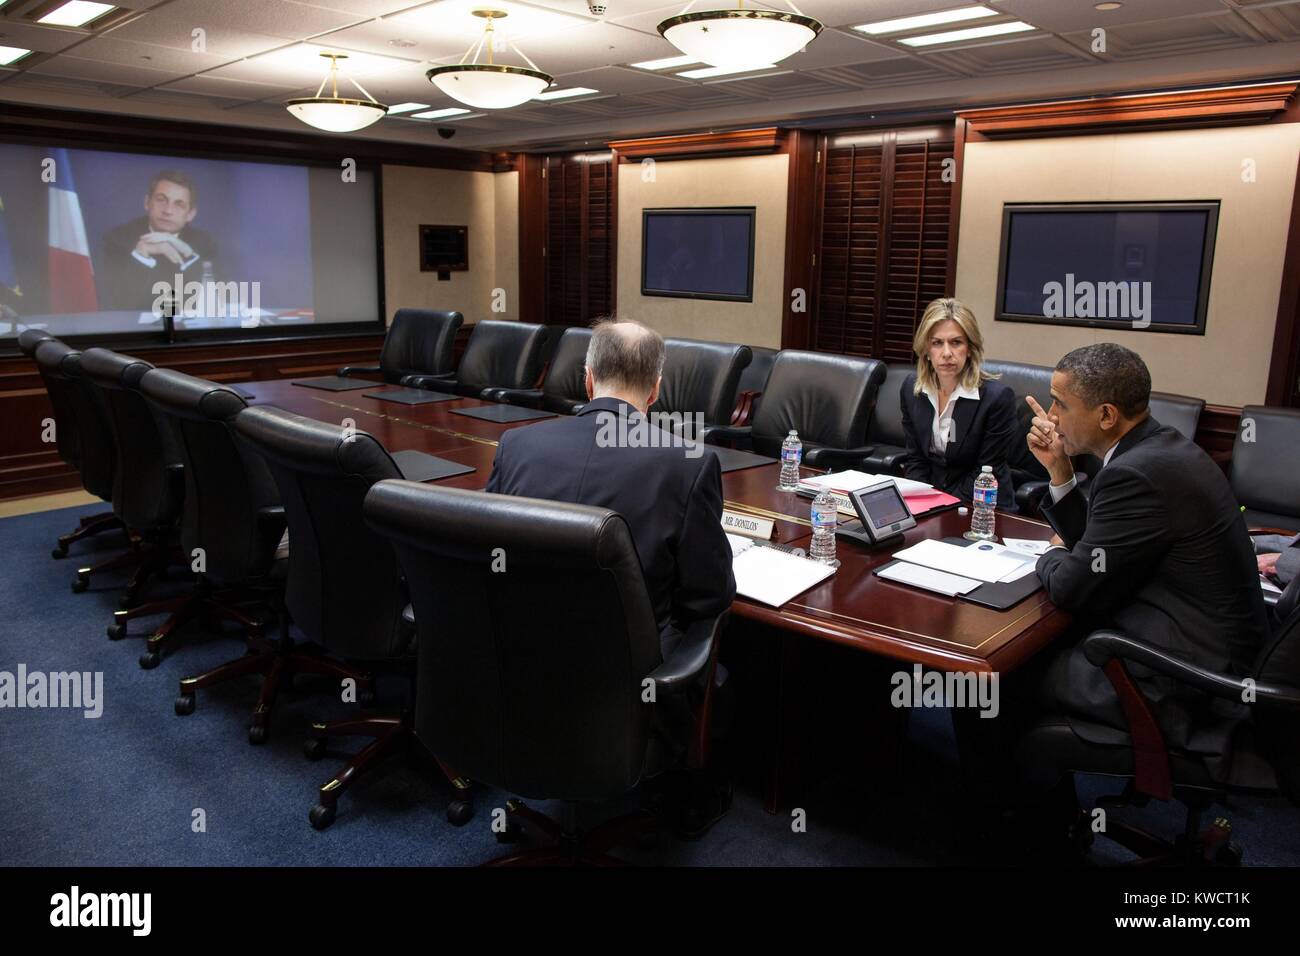 President Barack Obama in a video teleconference with President Nicolas Sarkozy of France. With the President in the Situation Room of the White House are National Security Advisor Tom Donilon and Sr. Dir. For European Affairs, Liz Sherwood-Randall. April 12, 2012. (BSLOC 2015 3 164) Stock Photo